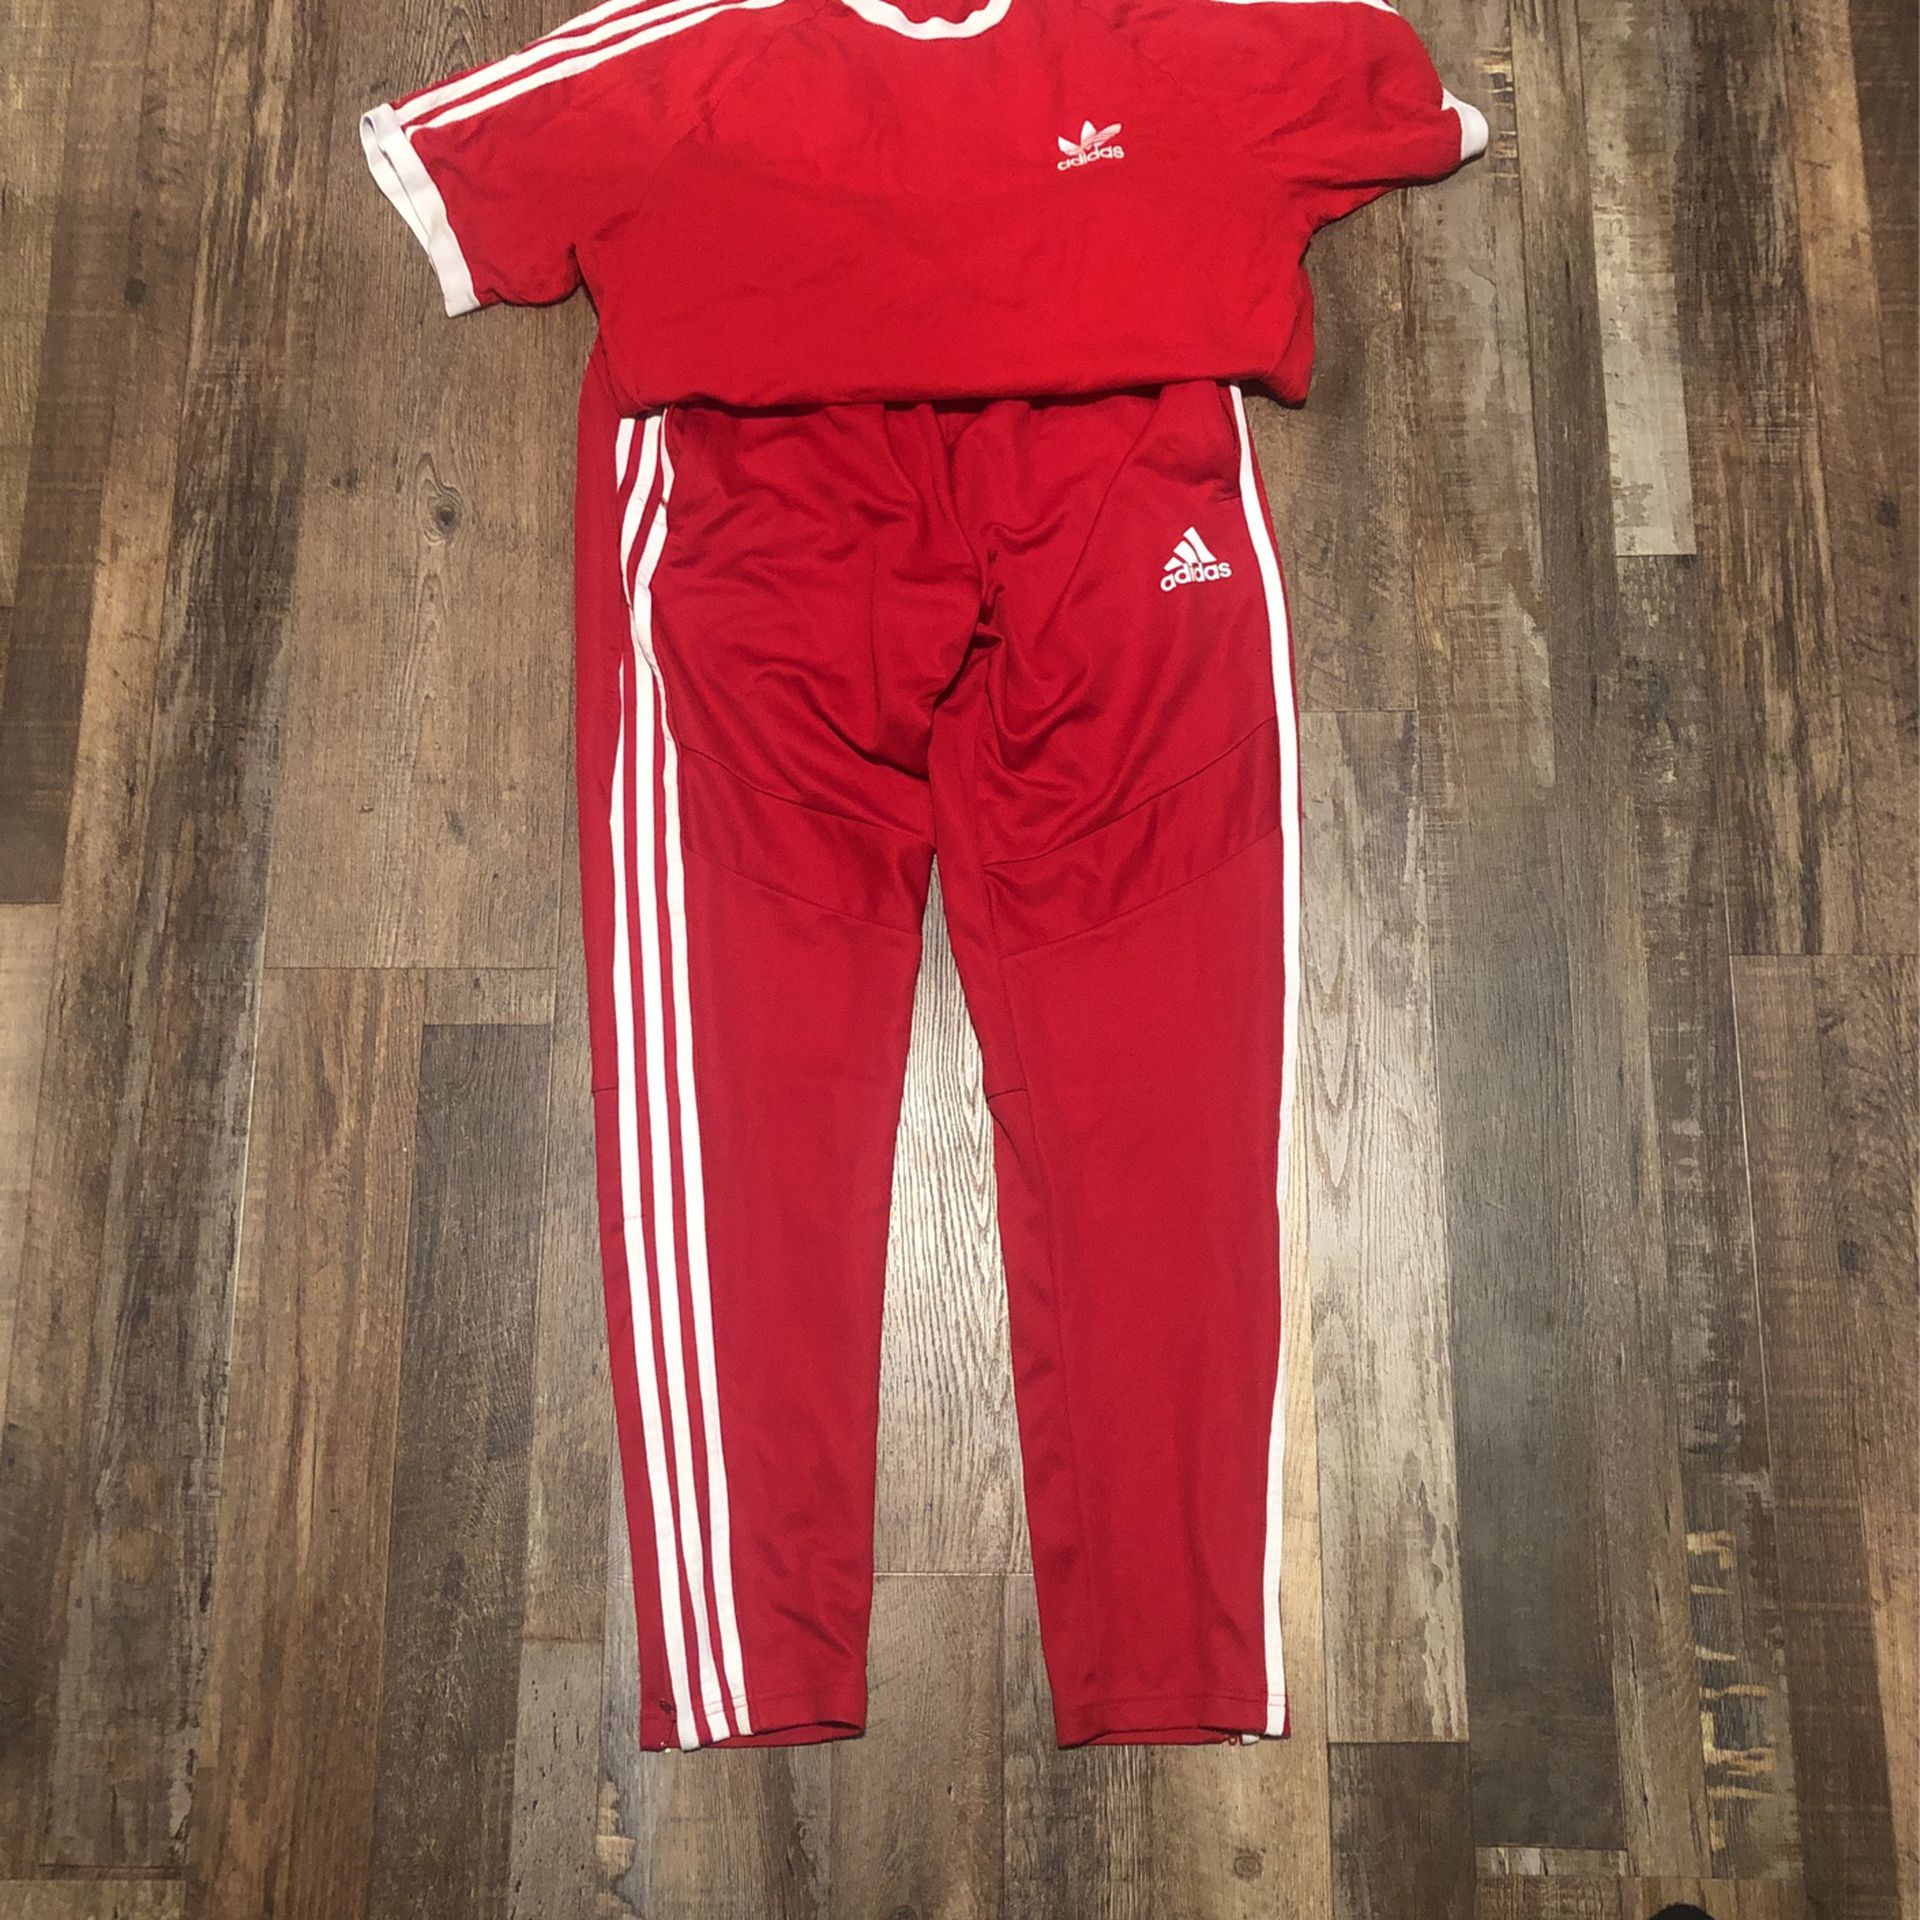 ADIDAS OUTFIT FOR SALE